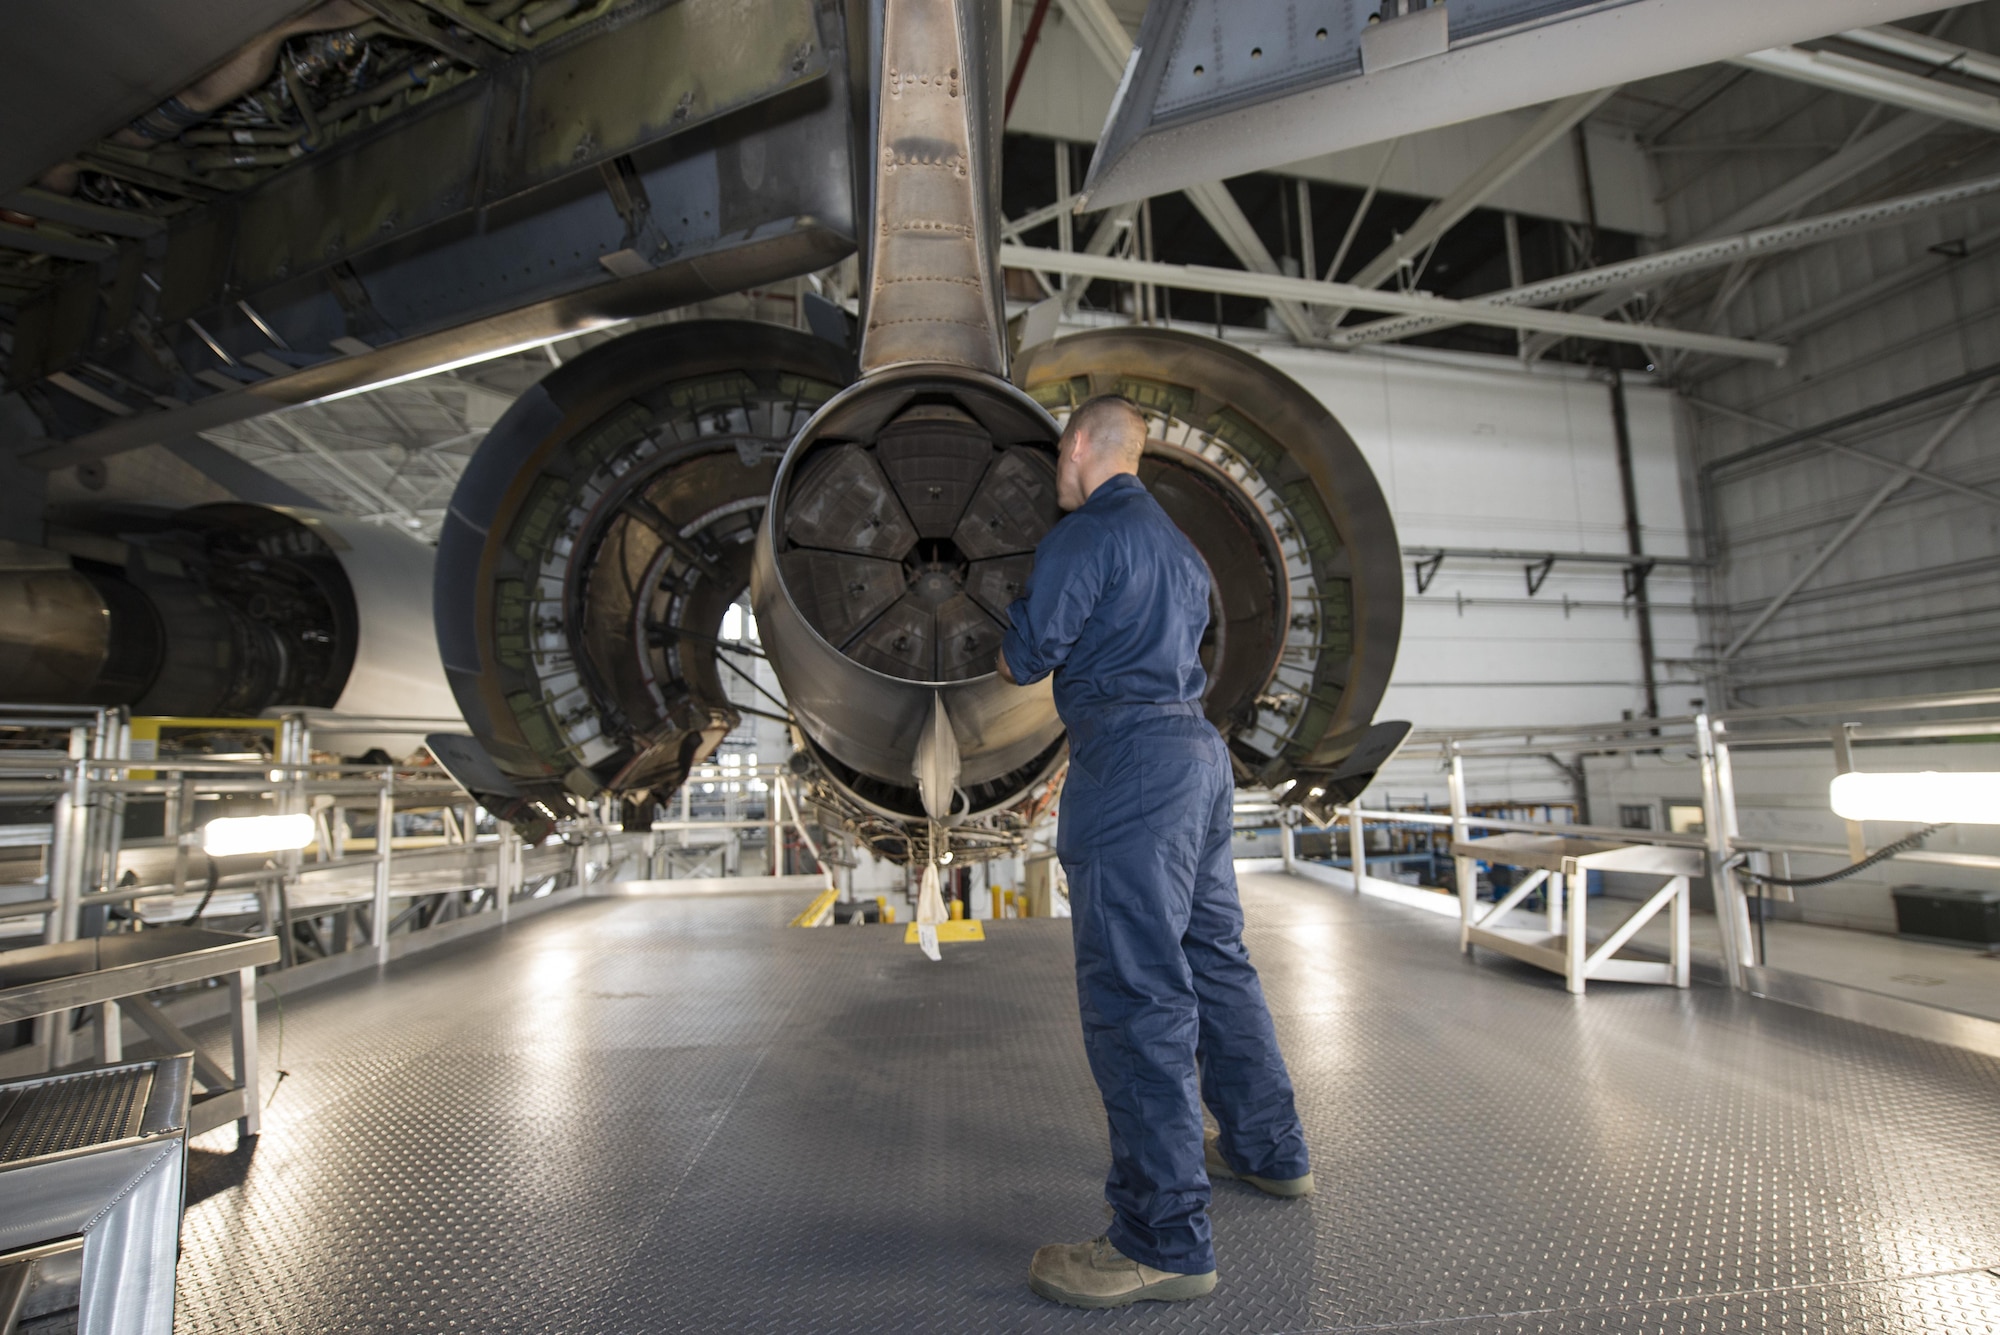 Senior Airman Austin Toniolo, 736th Aircraft Maintenance Squadron crew chief, stands on one of the squadron’s new C-17 Engine Maintenance Platforms while inspecting a C-17A Globemaster III engine Aug 1, 2016, at Dover Air Force Base, Del. Each week the squadron’s home station check team inspects an aircraft assigned to the 436th Airlift Wing. The stands provide a more stable platform for Airmen as they inspect the aircraft engines. (U.S. Air Force photo by Senior Airman Aaron J. Jenne)